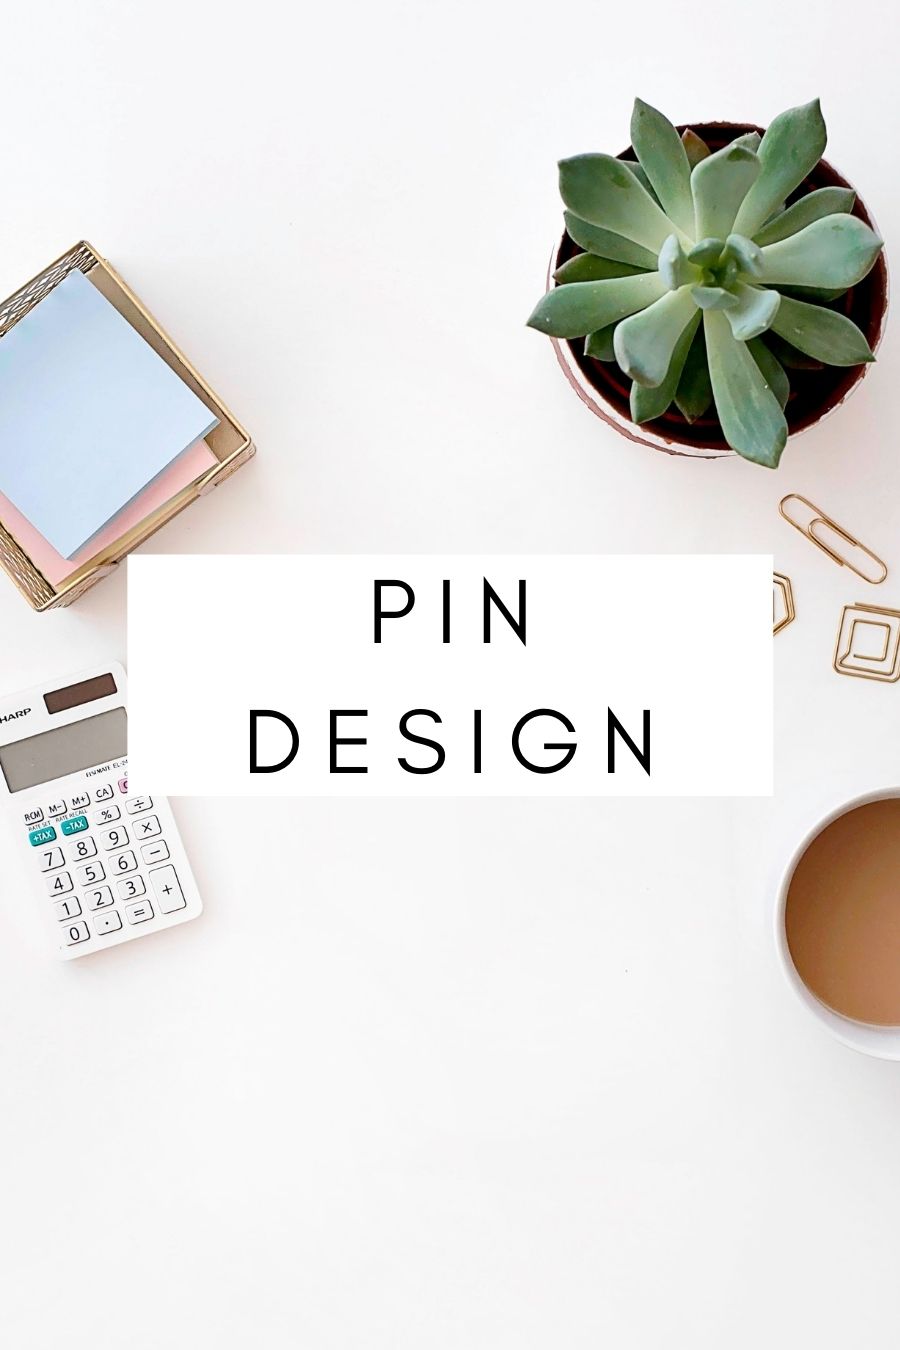 Pin Design Category